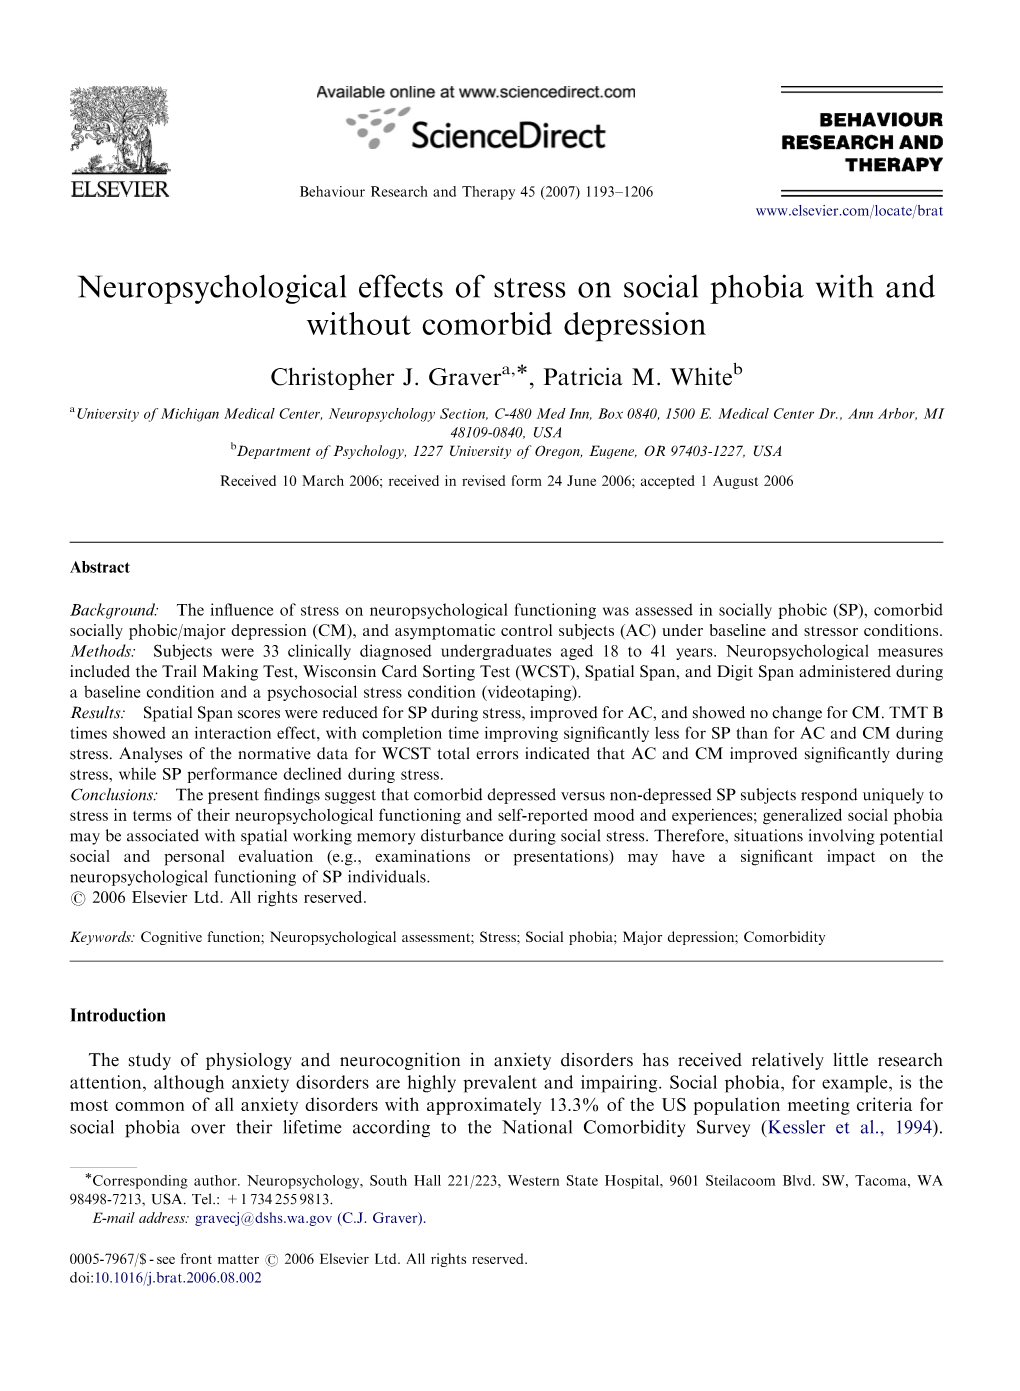 Neuropsychological Effects of Stress on Social Phobia with and Without Comorbid Depression